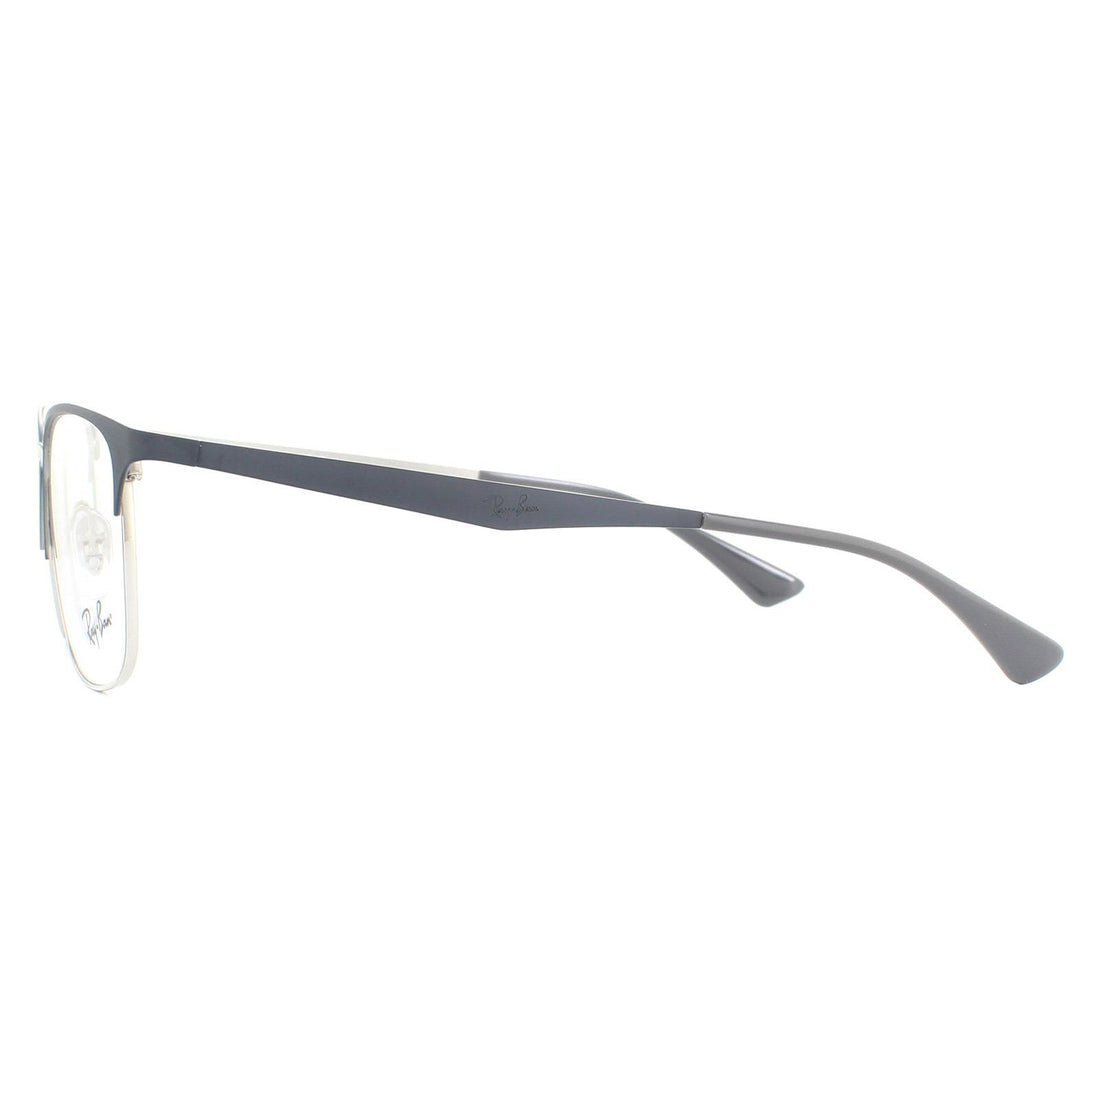 Ray-Ban Glasses Frames RX6421 3004 Grey and Silver 52mm